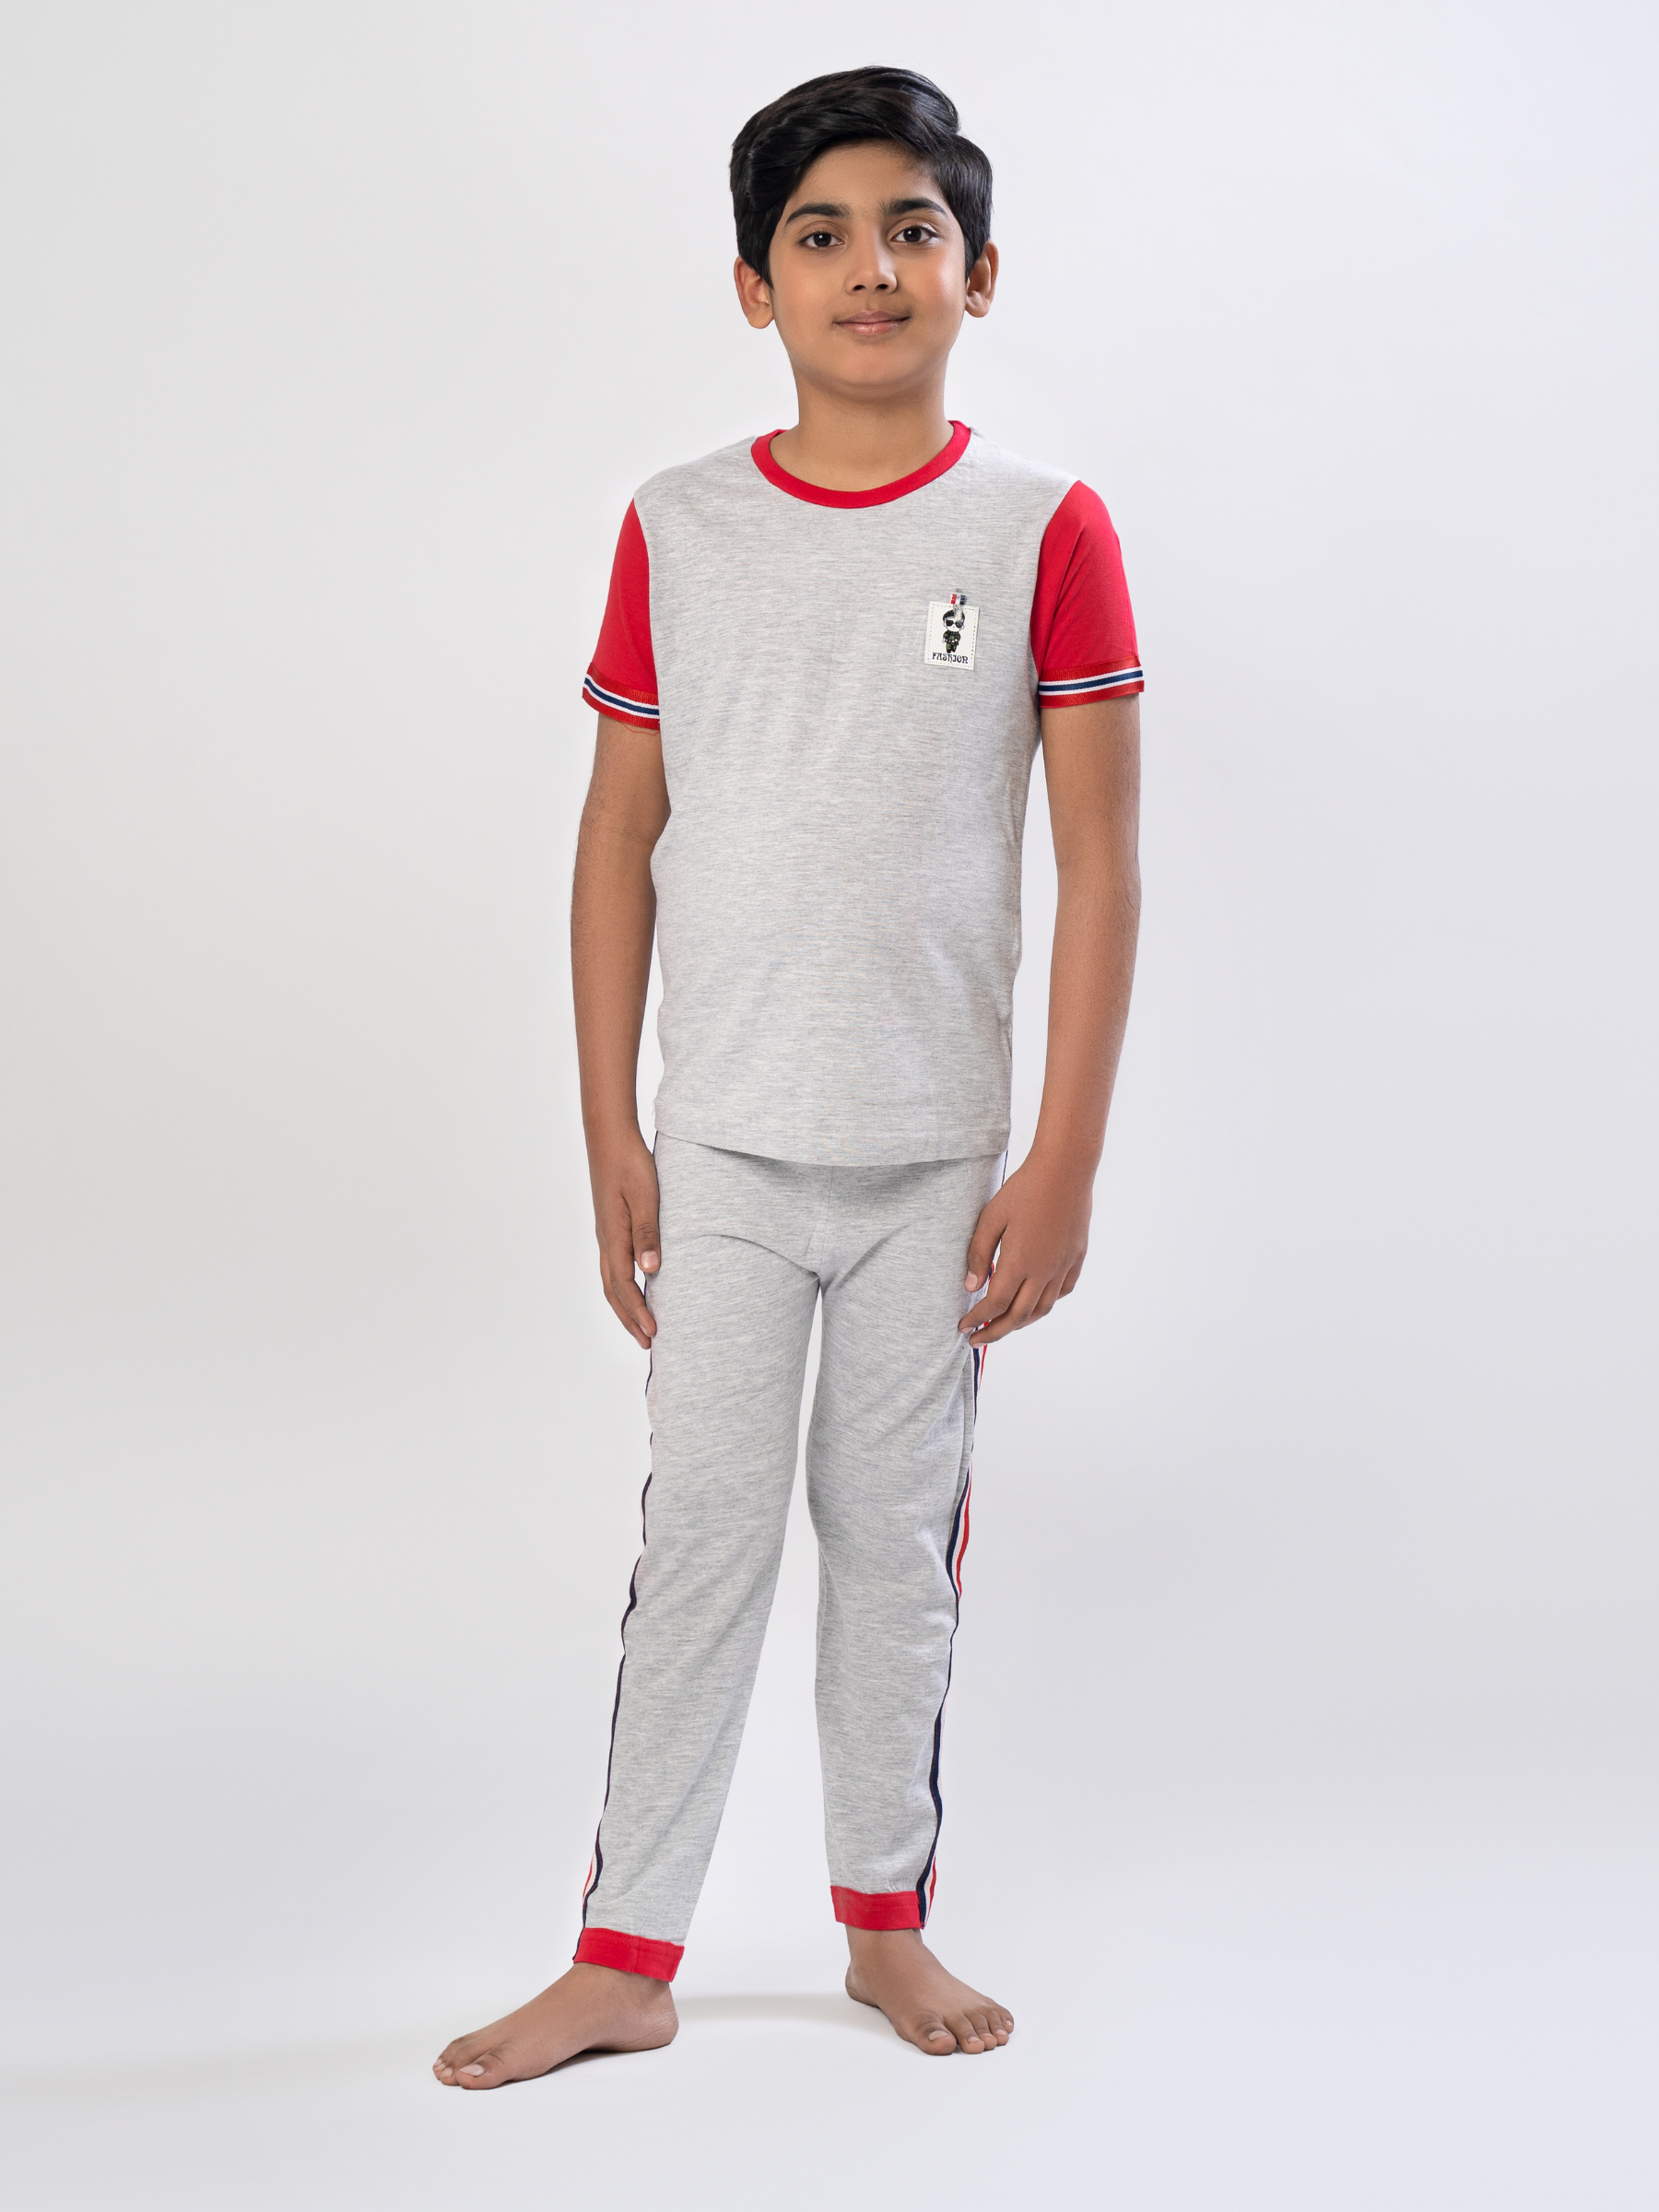 Kids Classic Assorted Unisex Night Suit (Short Sleeves) - Hinz Knit